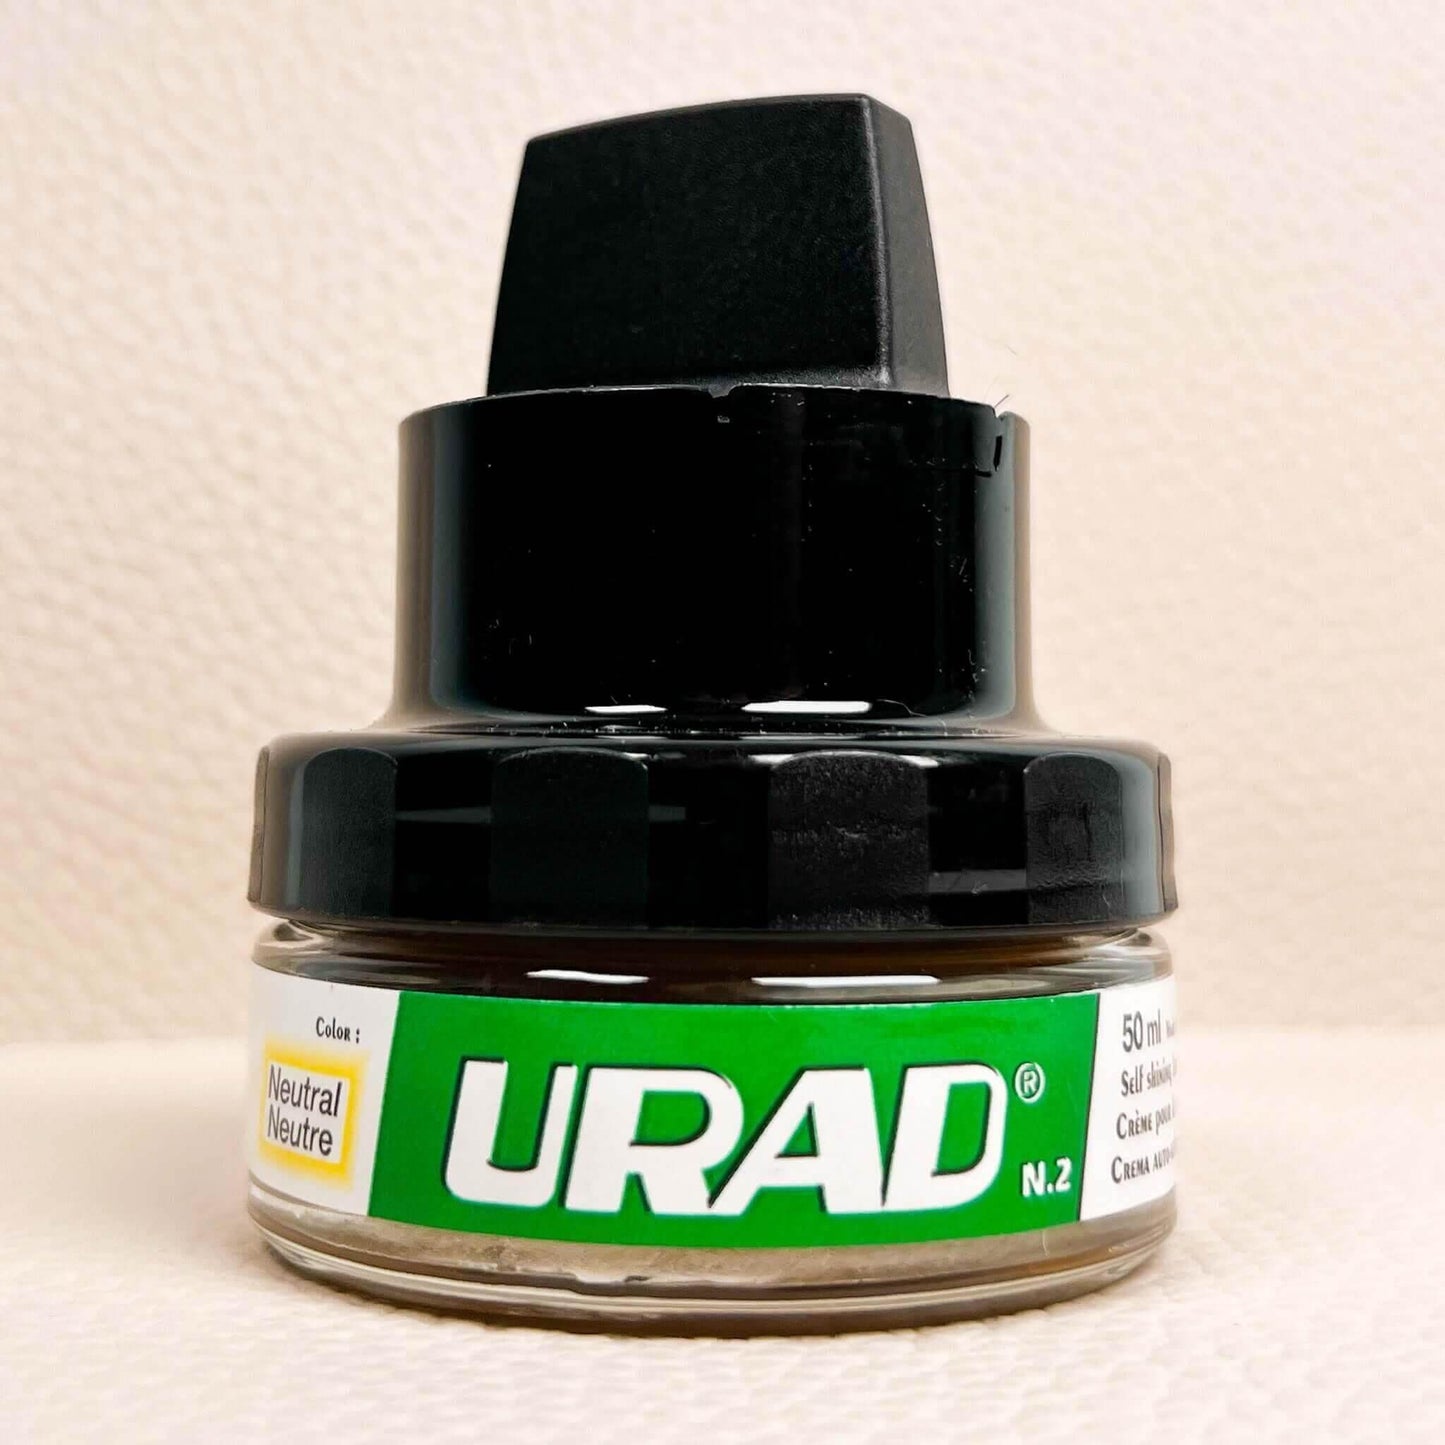 For those who want to protect and maintain the natural look of their leather couch, a neutral leather cream like Urad leather conditioner is an excellent option. Its gentle formula deeply conditions and nourishes leather without altering its color or texture, making it a reliable couch conditioner for those who want to keep their leather furniture looking great for years to come.